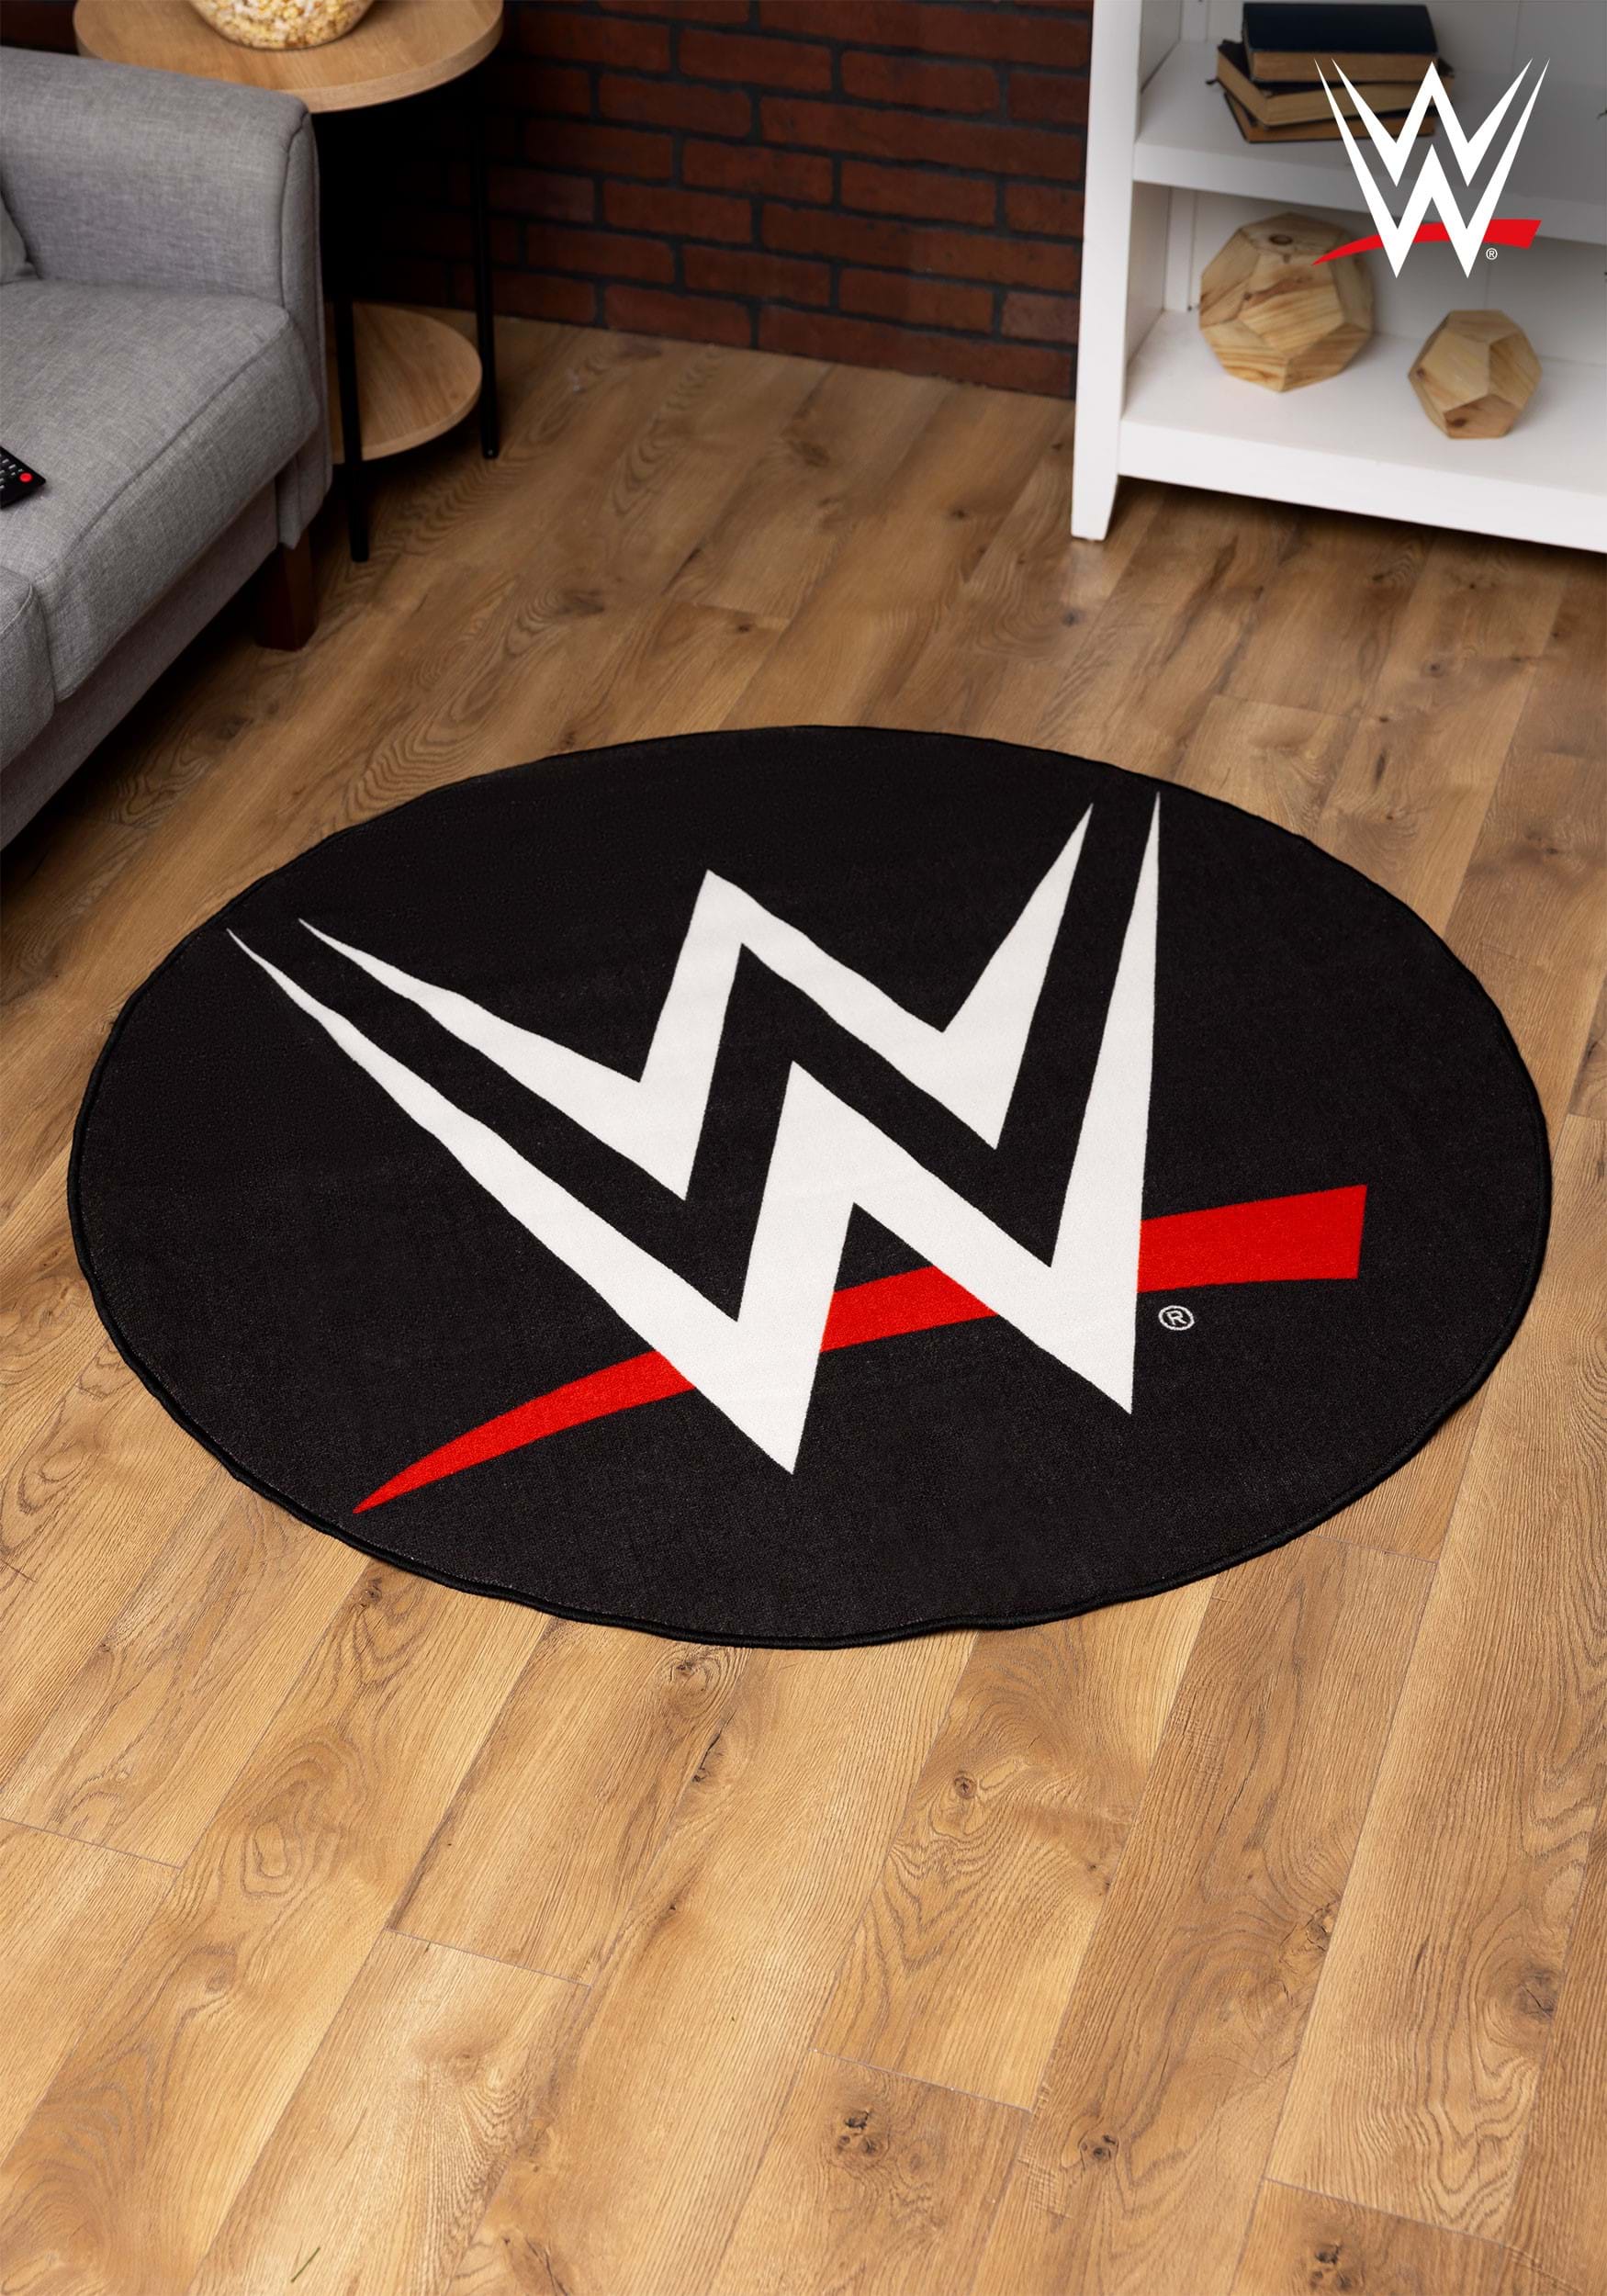 WWE Logo and symbol, meaning, history, sign.